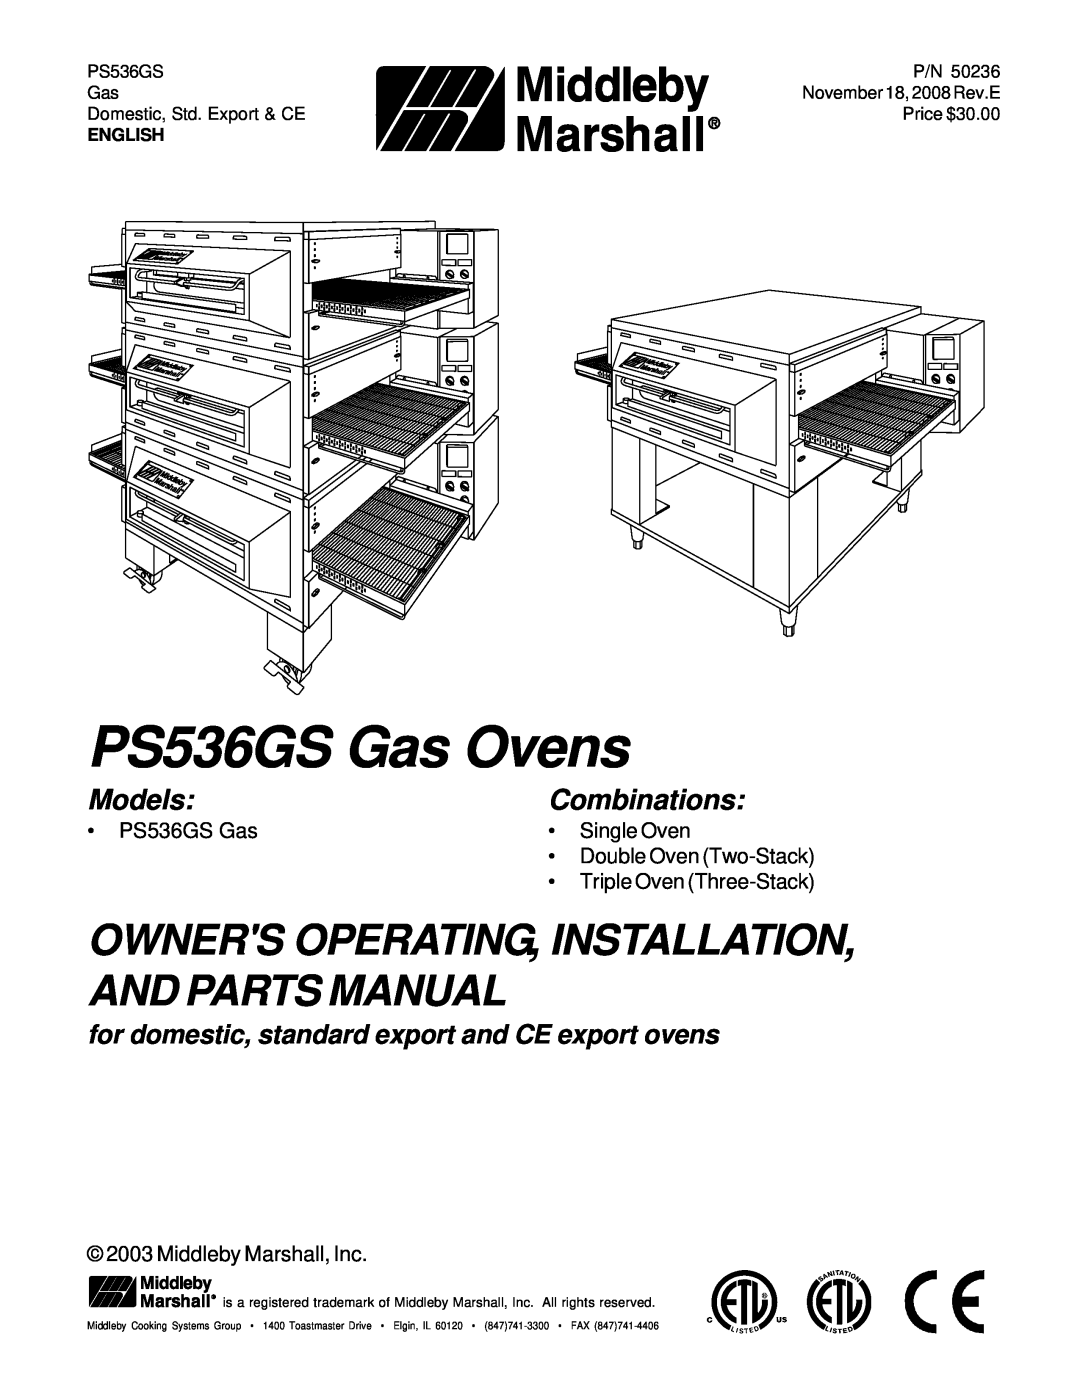 Middleby Marshall manual Models, Combinations, PS536GS Gas Ovens, Owners Operating, Installation, And Parts Manual 